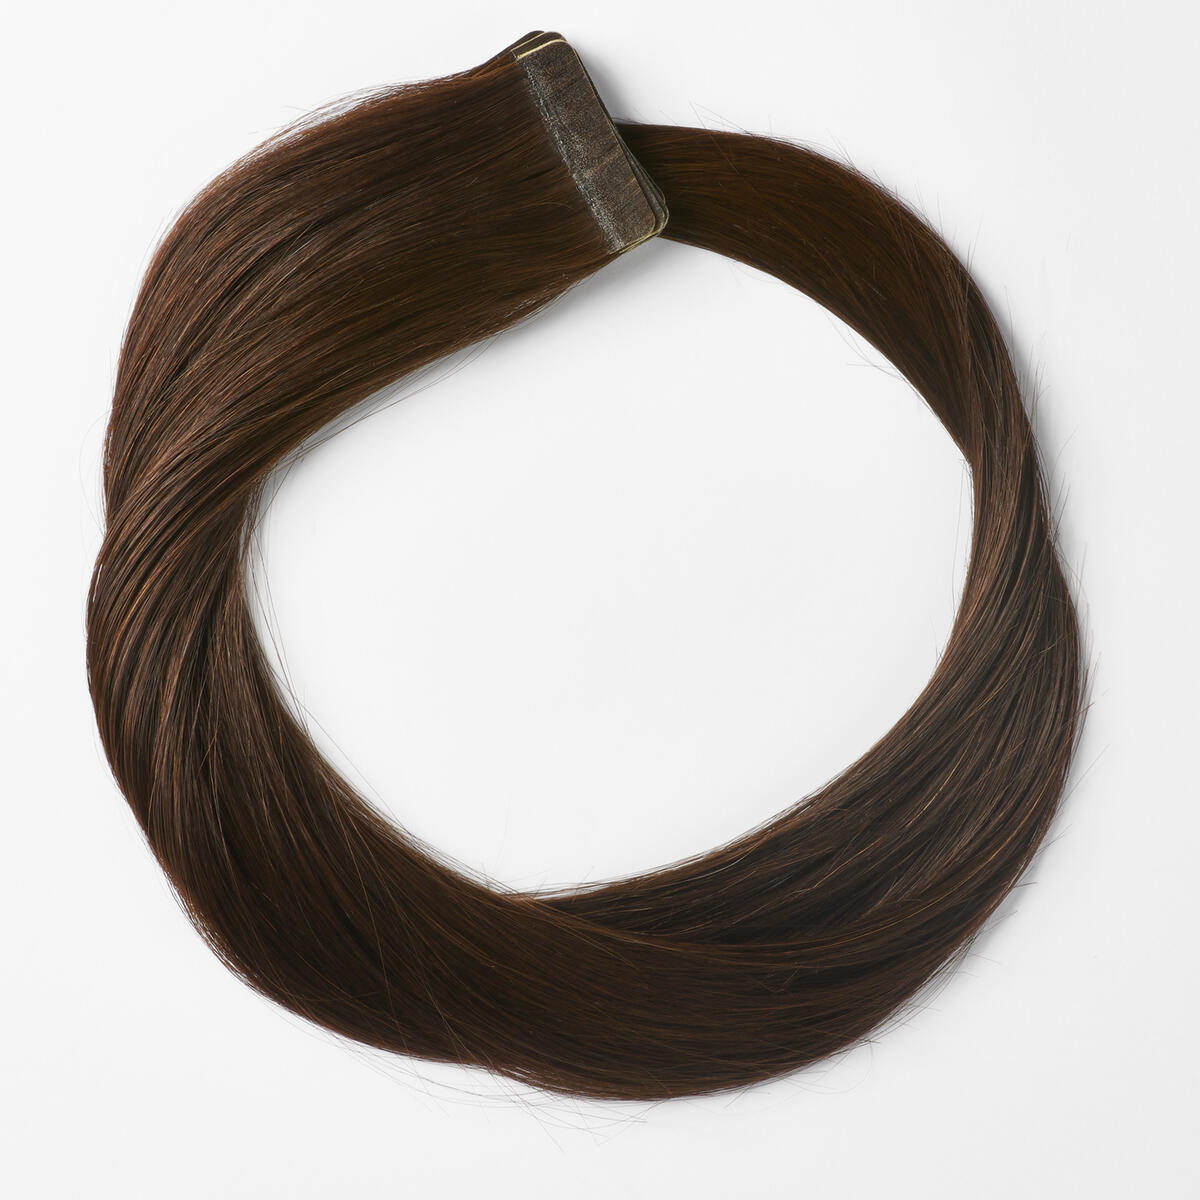 Basic Tape Extensions Classic 4 2.3 Chocolate Brown 30 cm